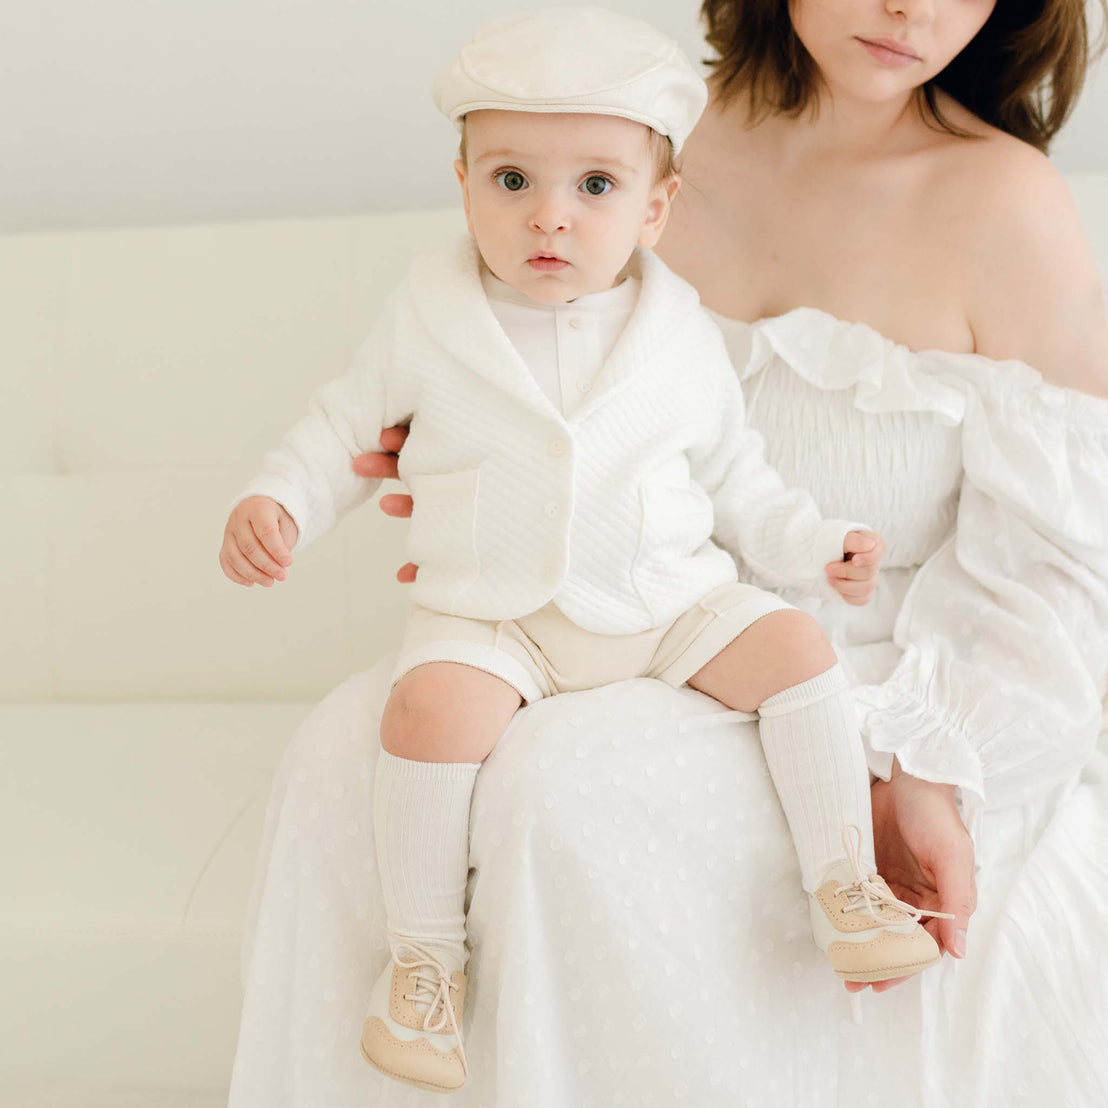 Baby boy sitting on his mother's lap. He is wearing the Braden 3-Piece Suit with the Newsboy Cap